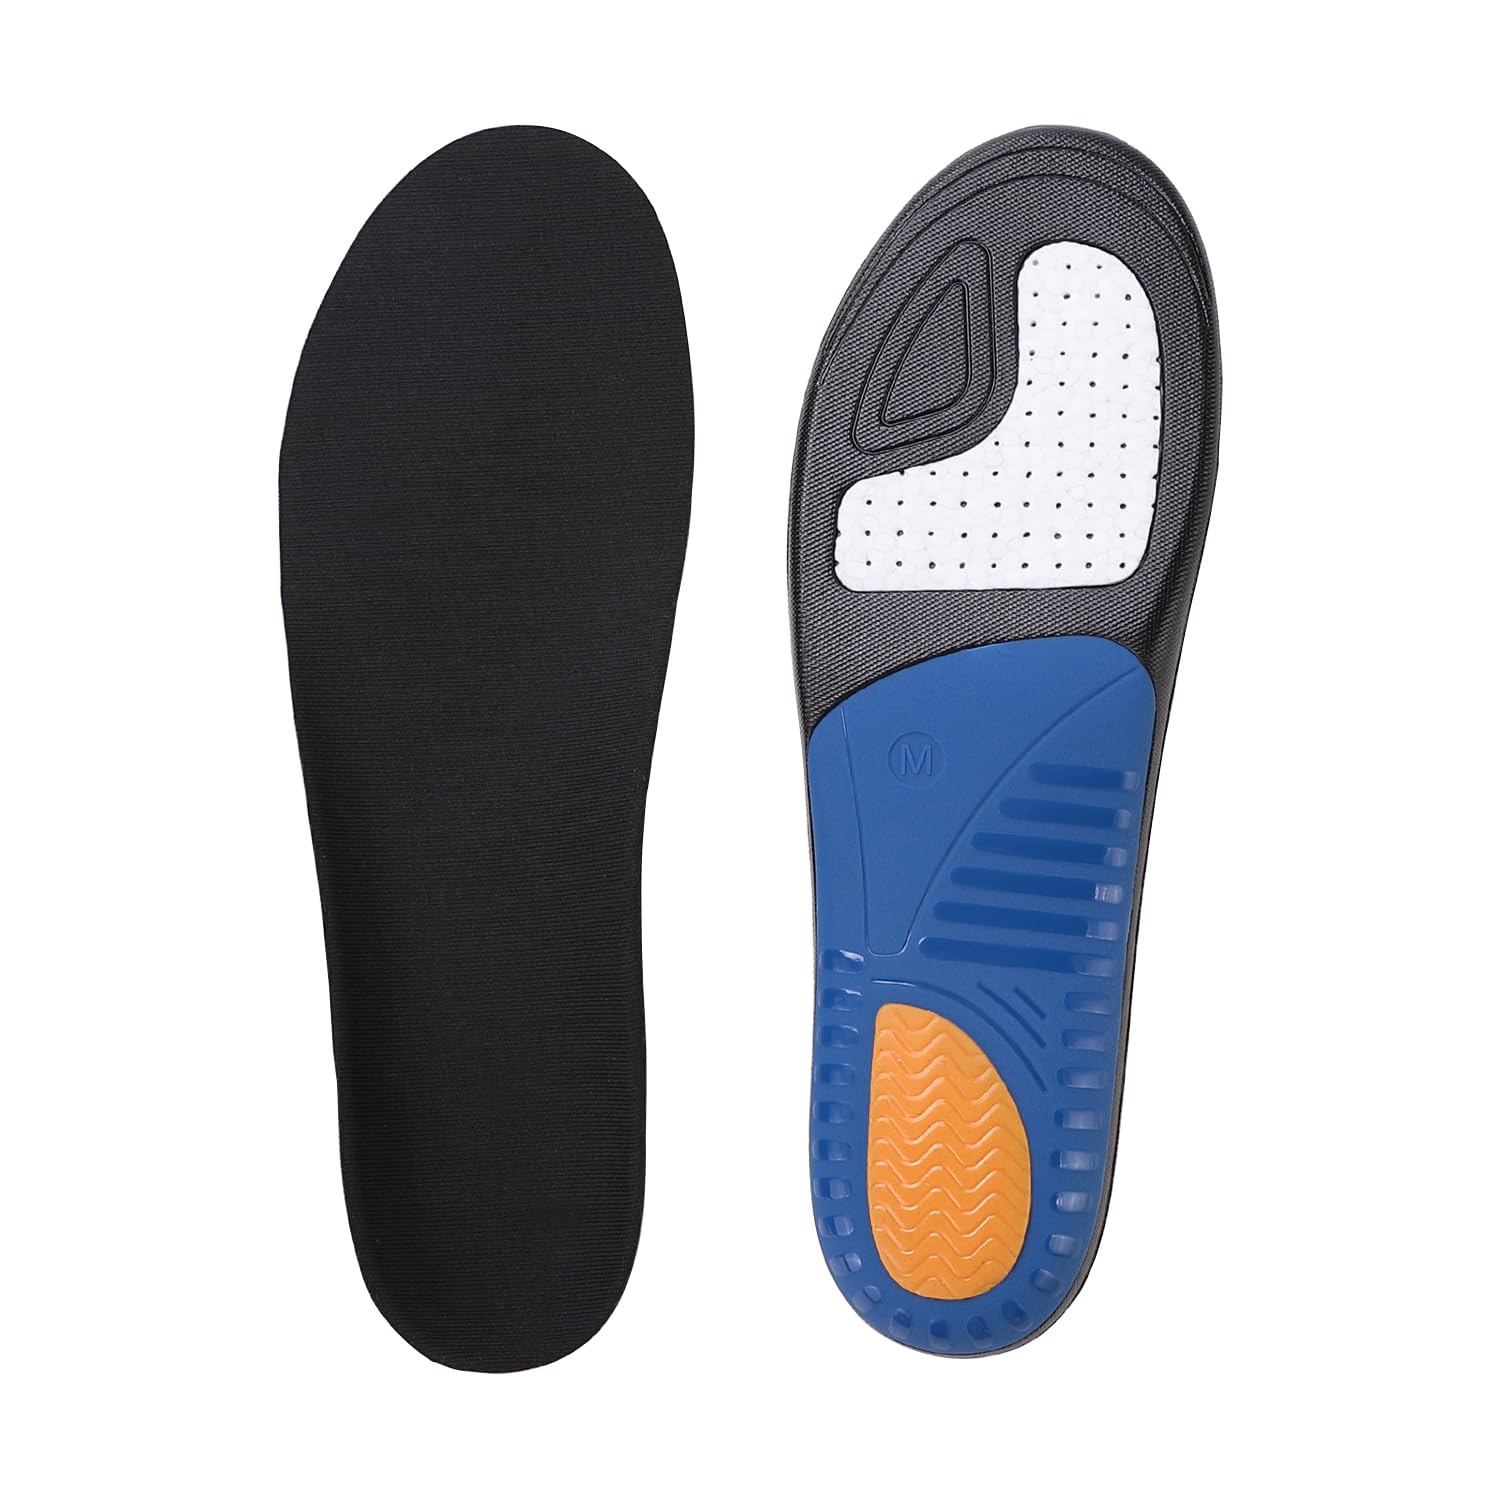 Dr Foot Running Insoles | For Running, Walking, Sport Activities | Optimal Support and Comfort for Runners | Breathable and Comfortable For Enhanced Performance | For Men & Women - 1 Pair (Large Size)